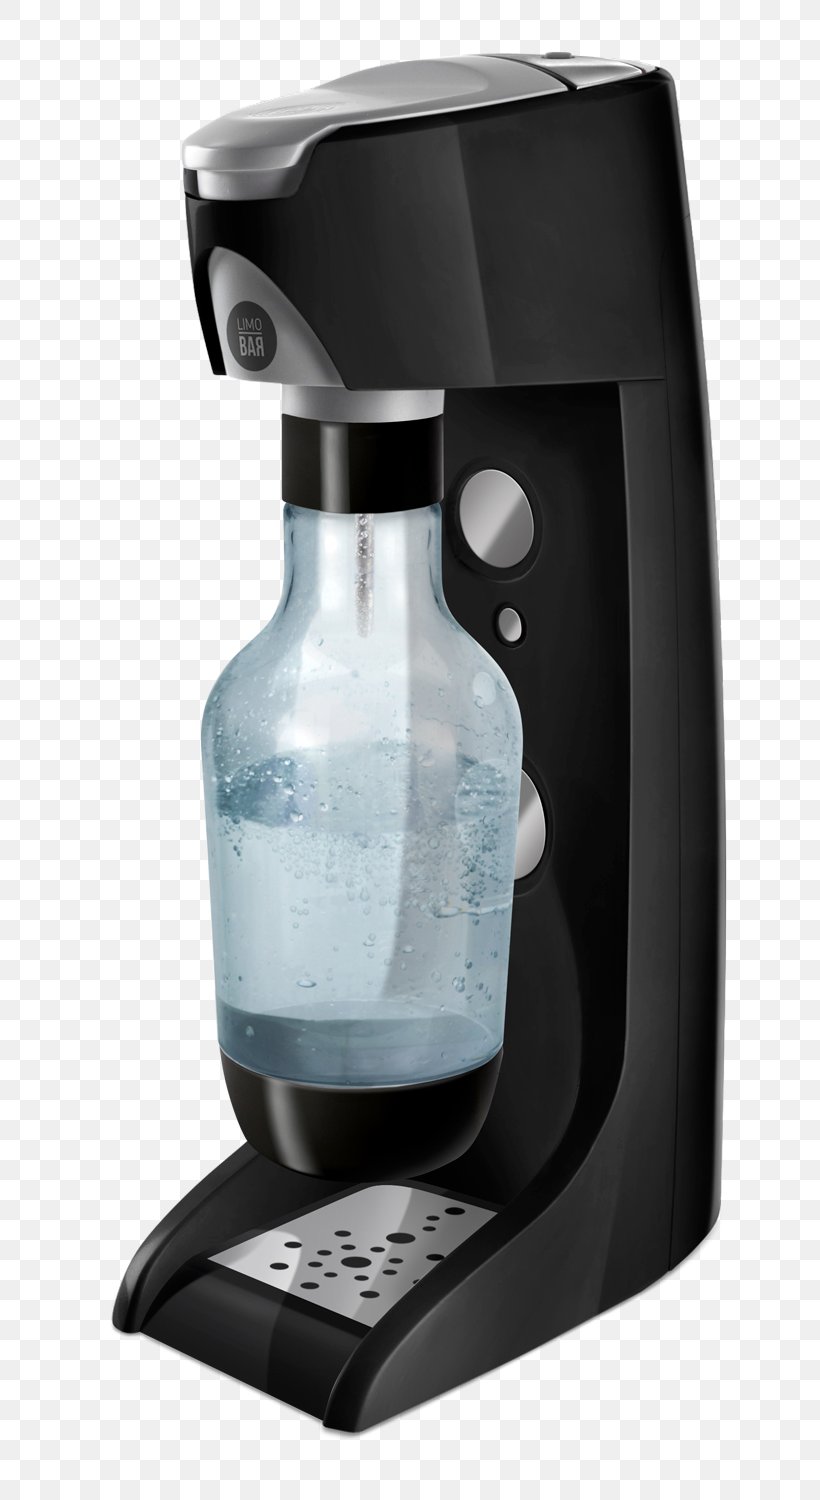 Carbonated Water Fizzy Drinks SodaStream Coffeemaker Zboží.cz, PNG, 726x1500px, Carbonated Water, Carbon Dioxide, Coffeemaker, Fizzy Drinks, Heureka Shopping Download Free